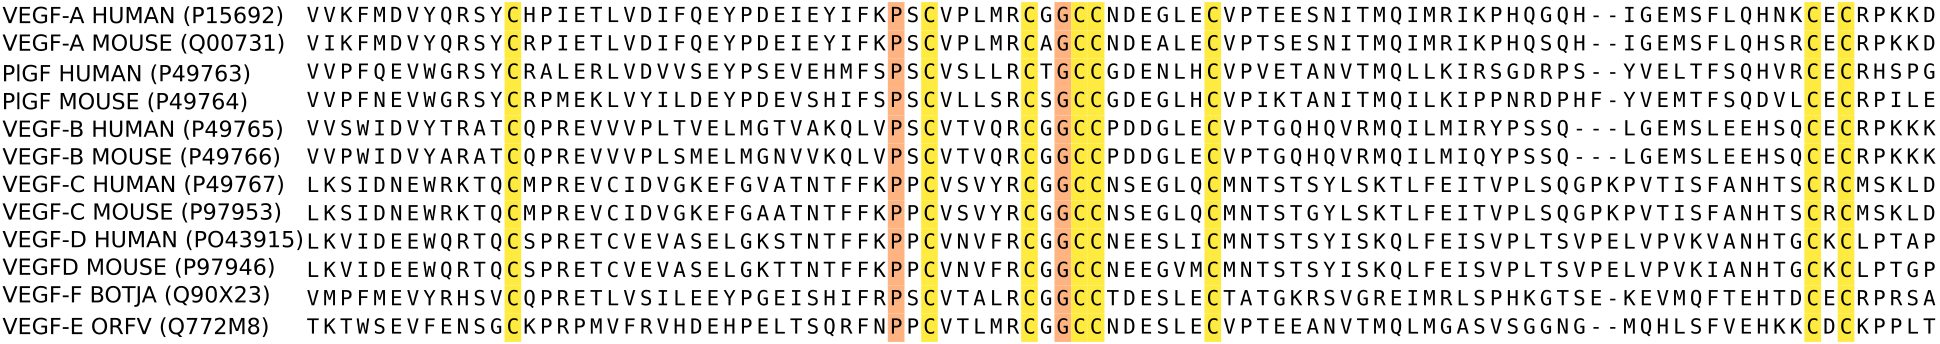 An alignment of amino acids sequences in a protein for mice and humans.